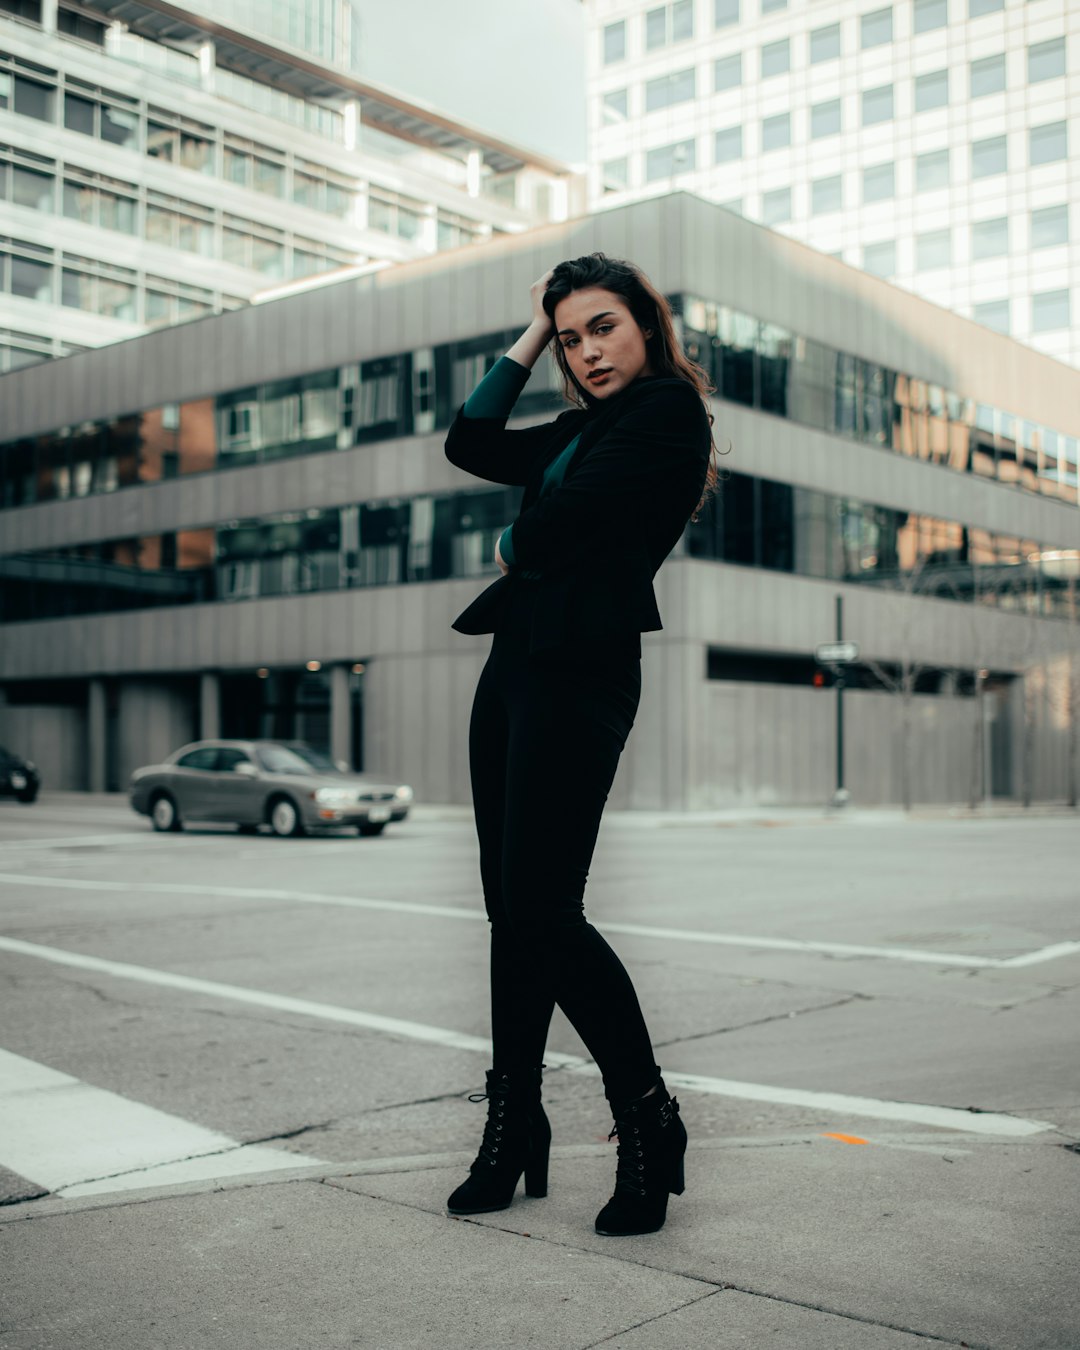 woman in black long sleeve shirt and black pants standing on road during daytime